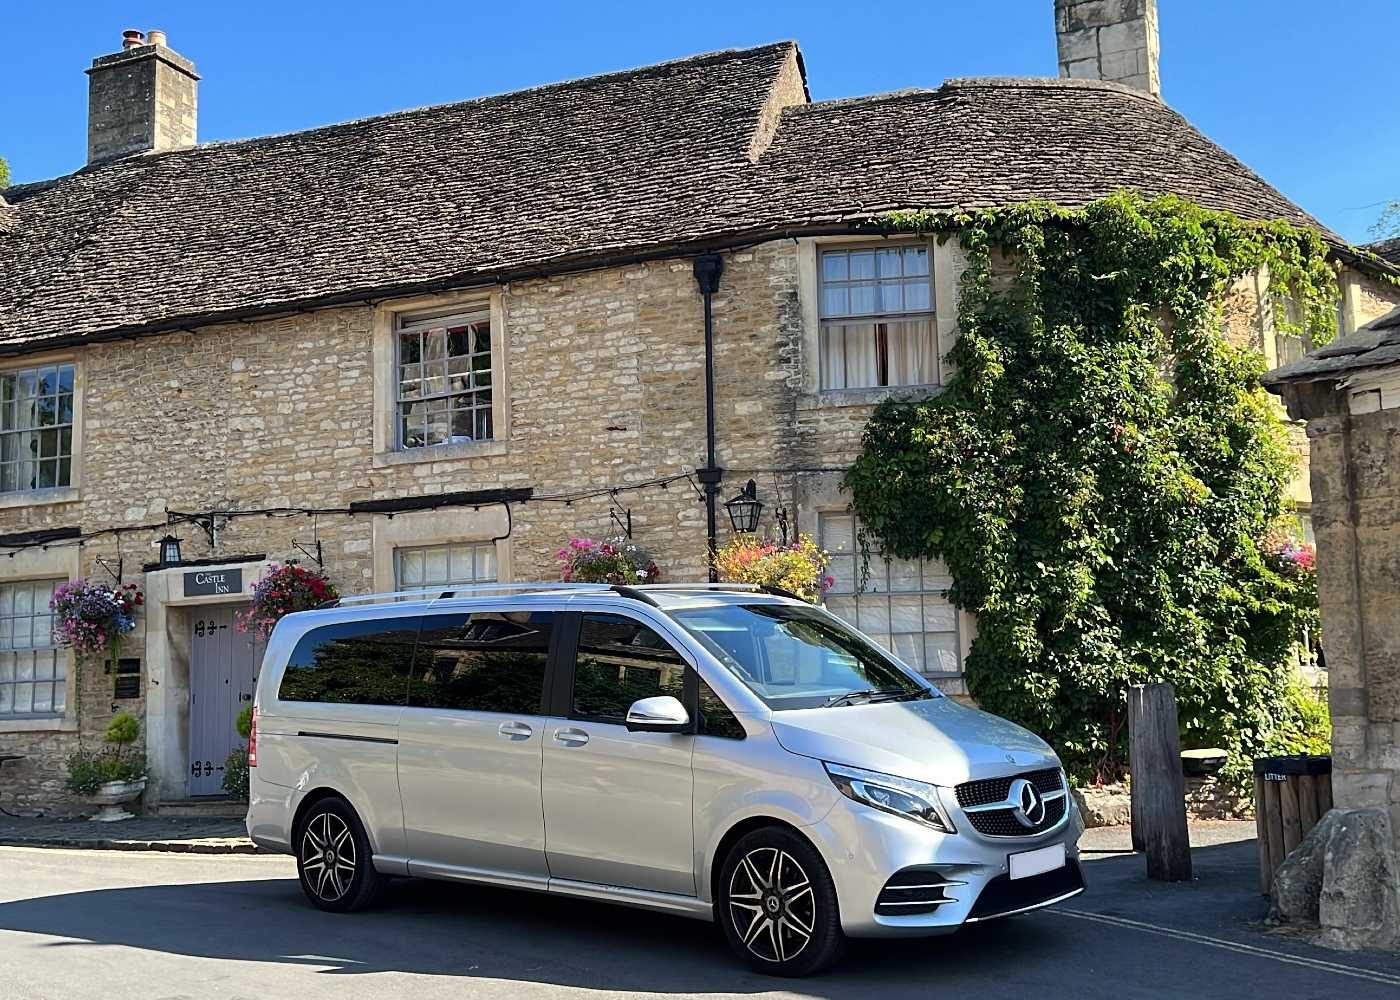 Chauffeur tour of the cotswolds